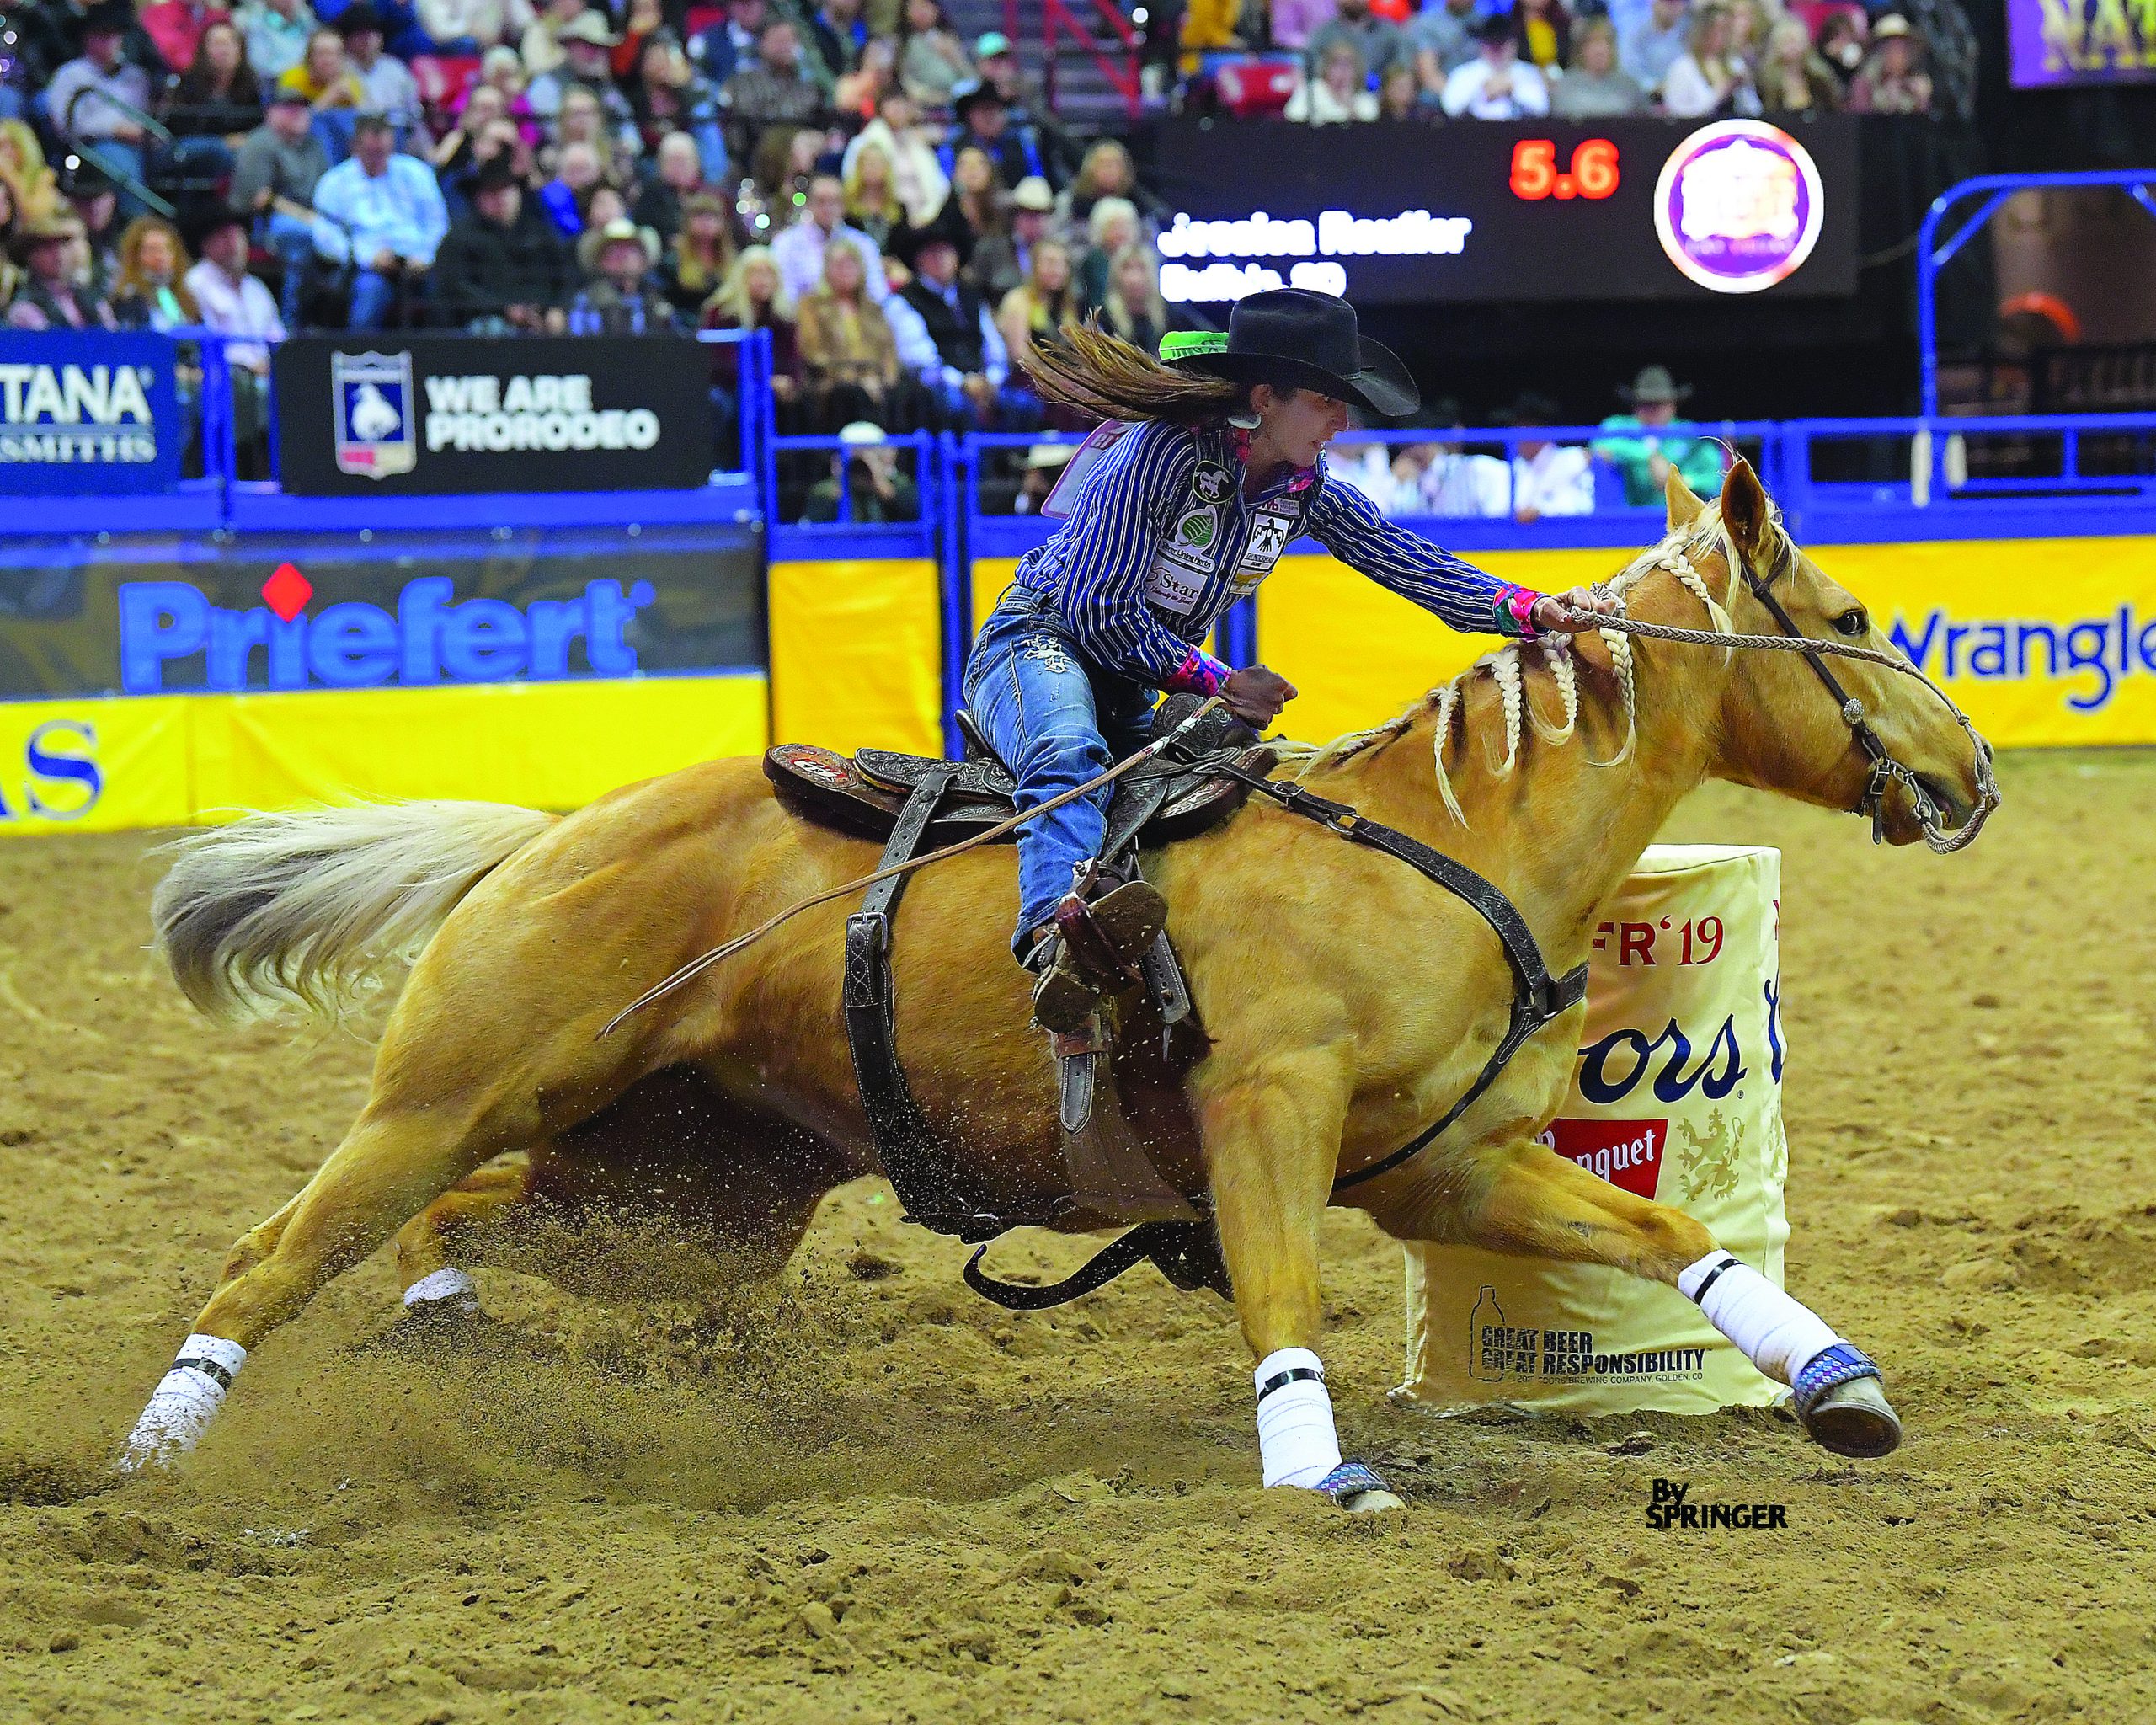 Horses bred in the wild are rodeo naturals, Lifestyles